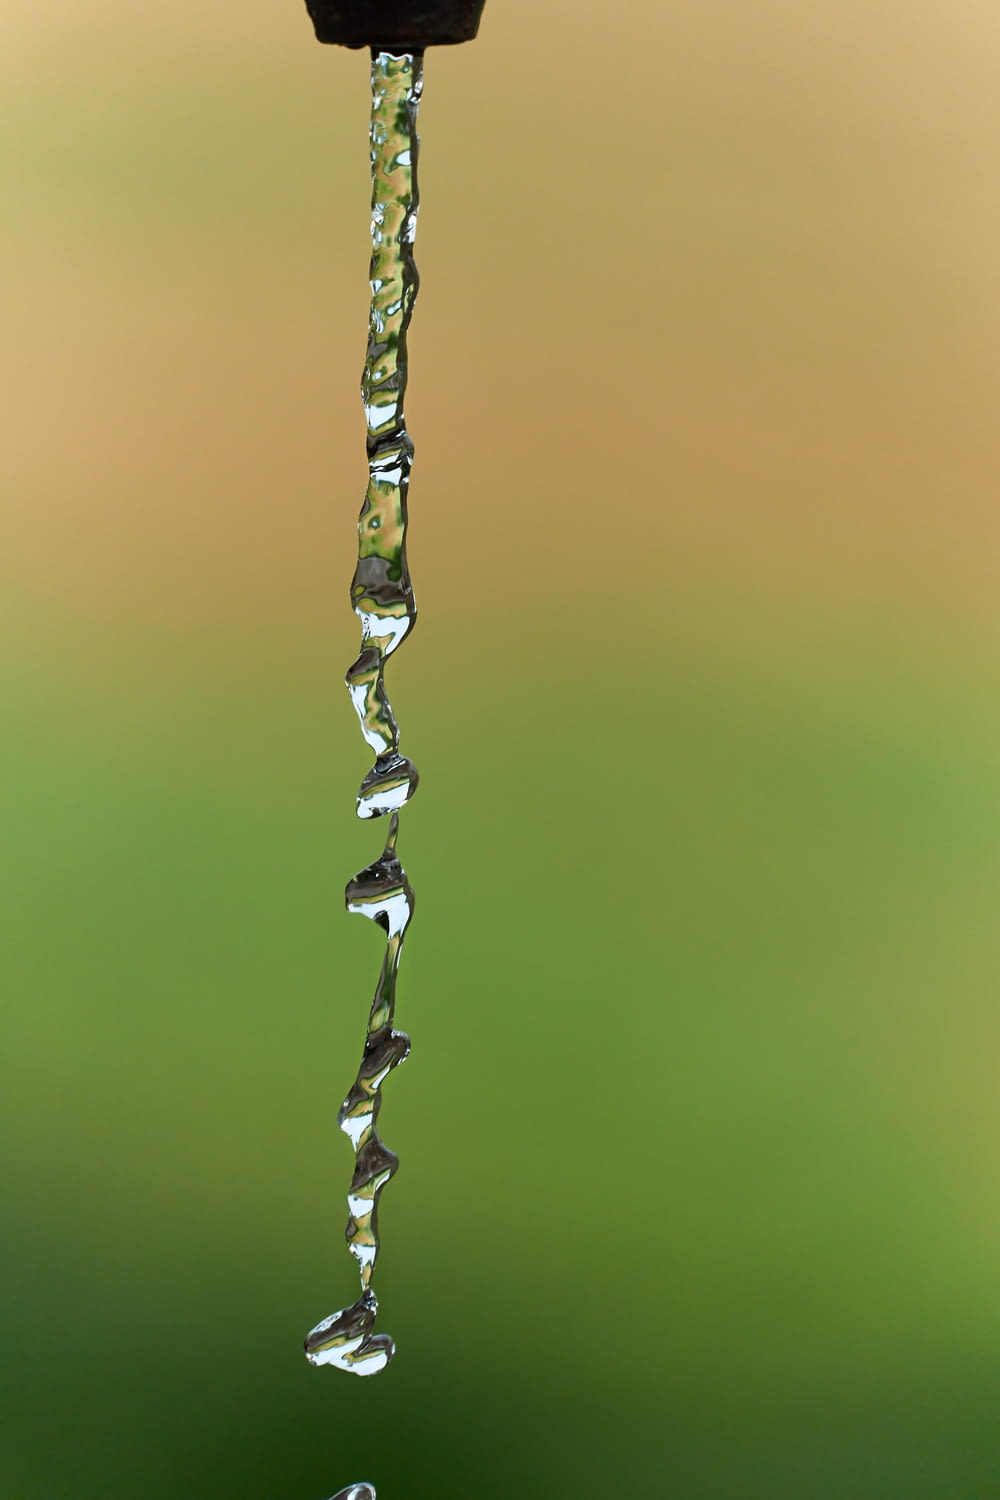 a close-up of a drop of water